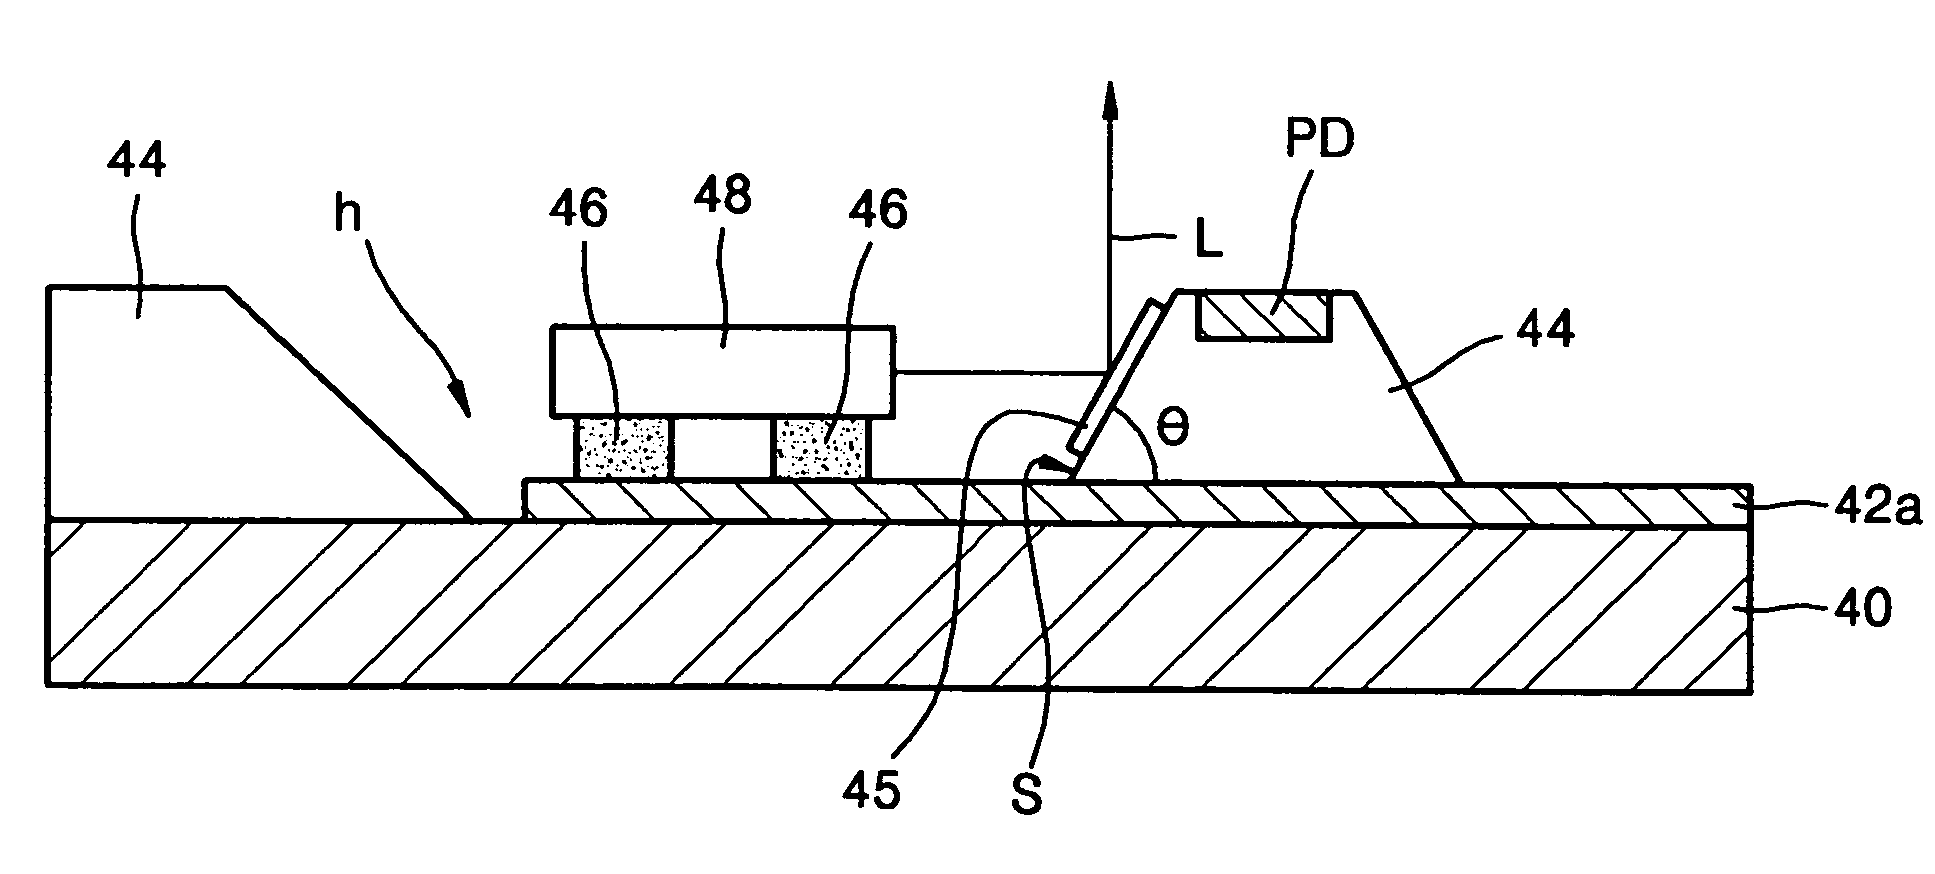 Micro optical bench structure and method of manufacturing the same